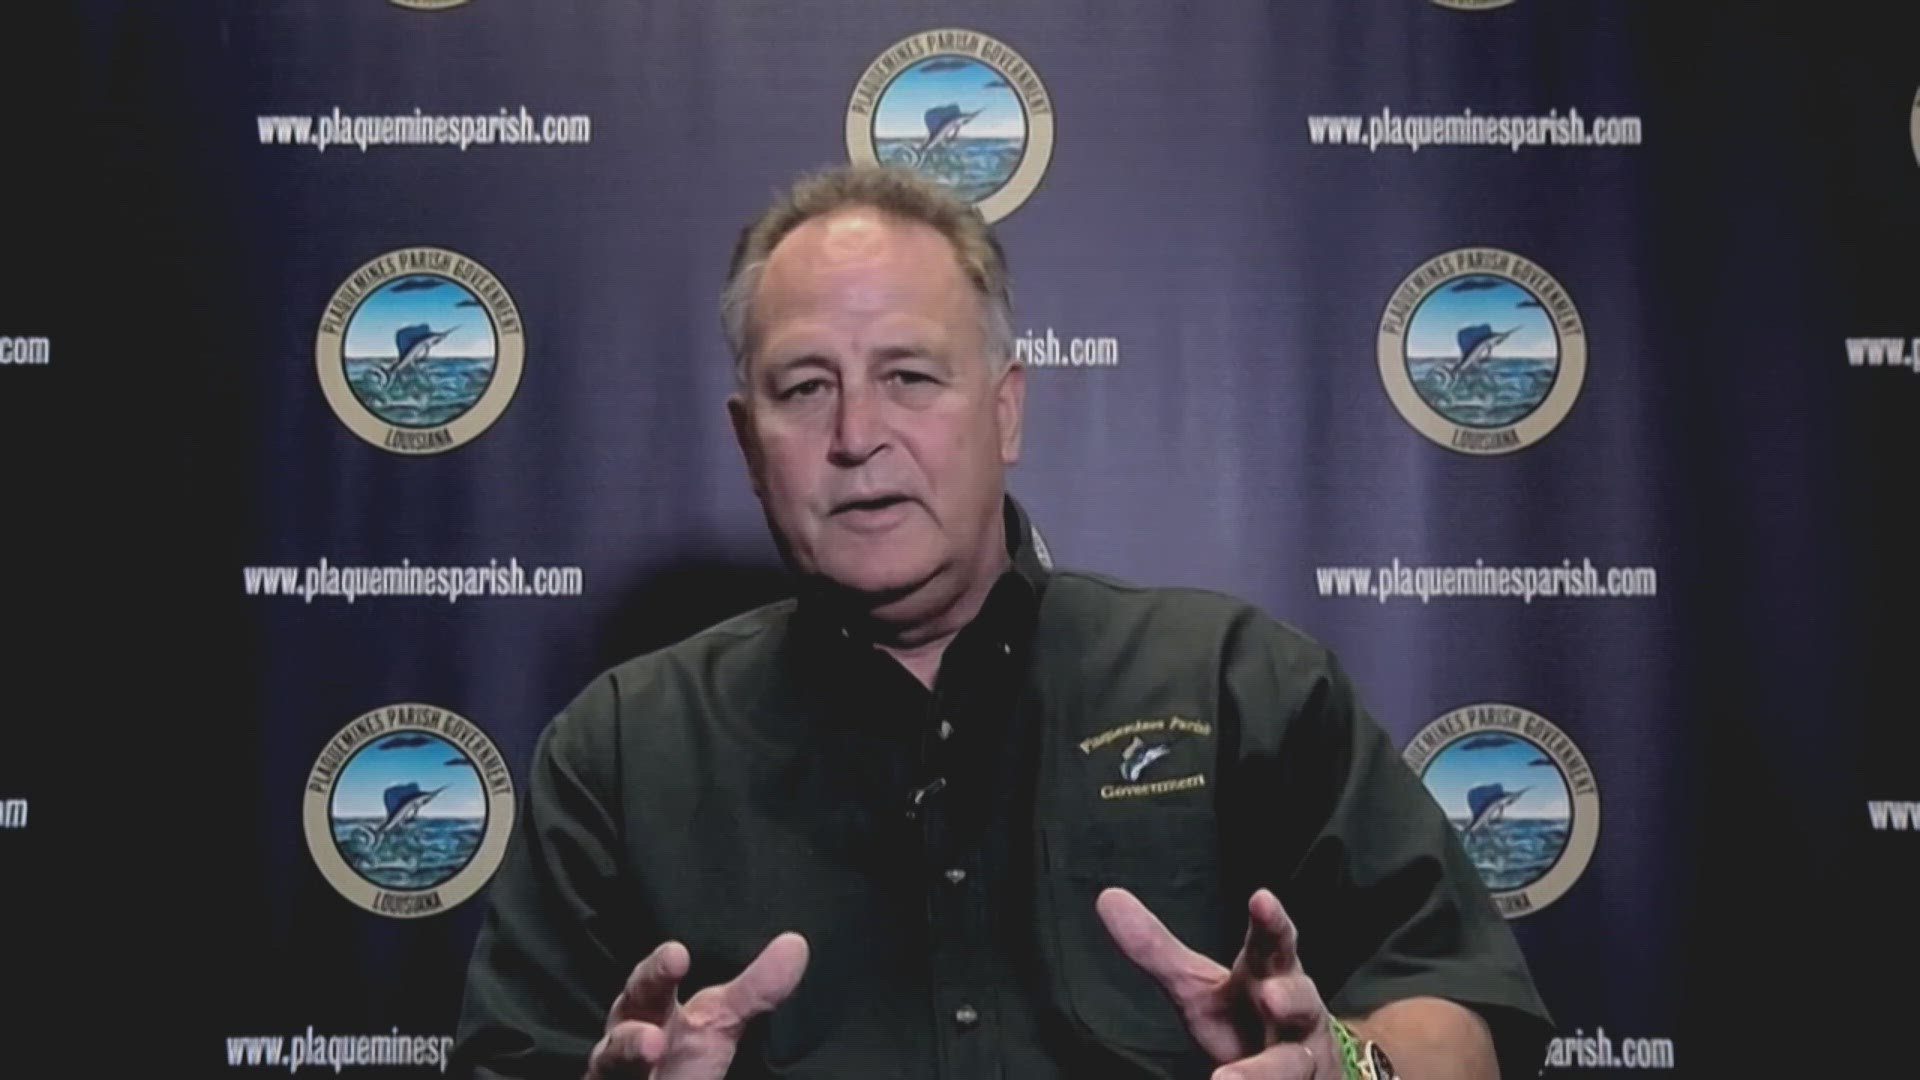 Plaquemines Parish President Keith Hinkley gives an update on the parish preparations for saltwater intrusion.